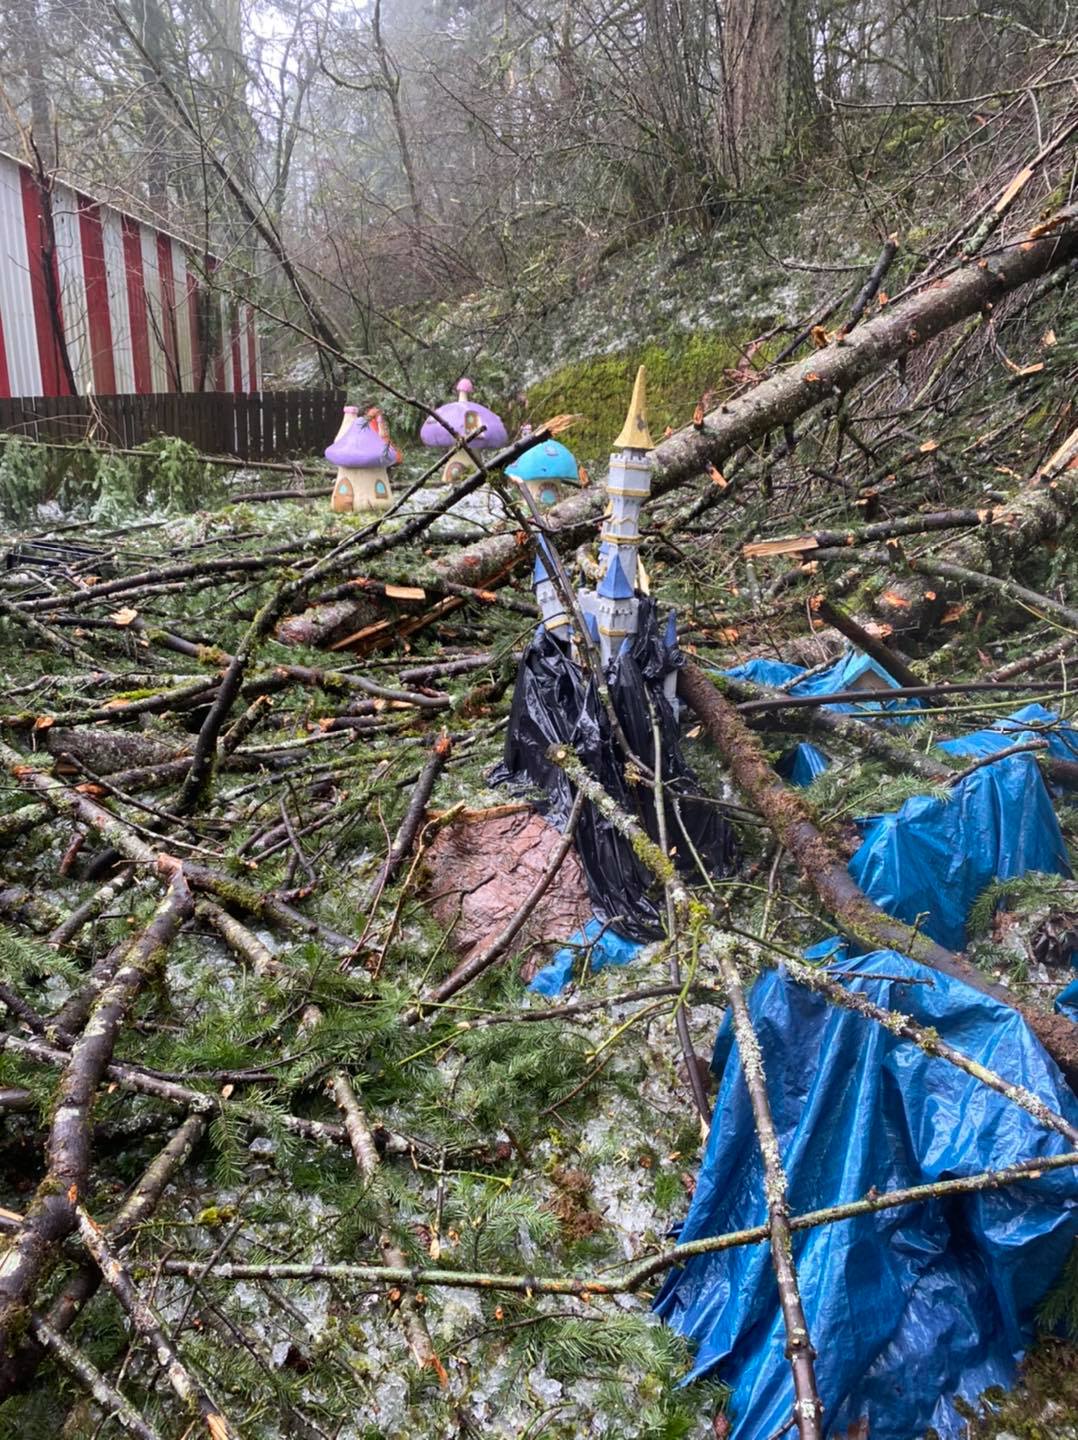 The snow and ice storms that hit the Northwest did serious damage to the Enchanted Forest theme park south of Salem, Ore.